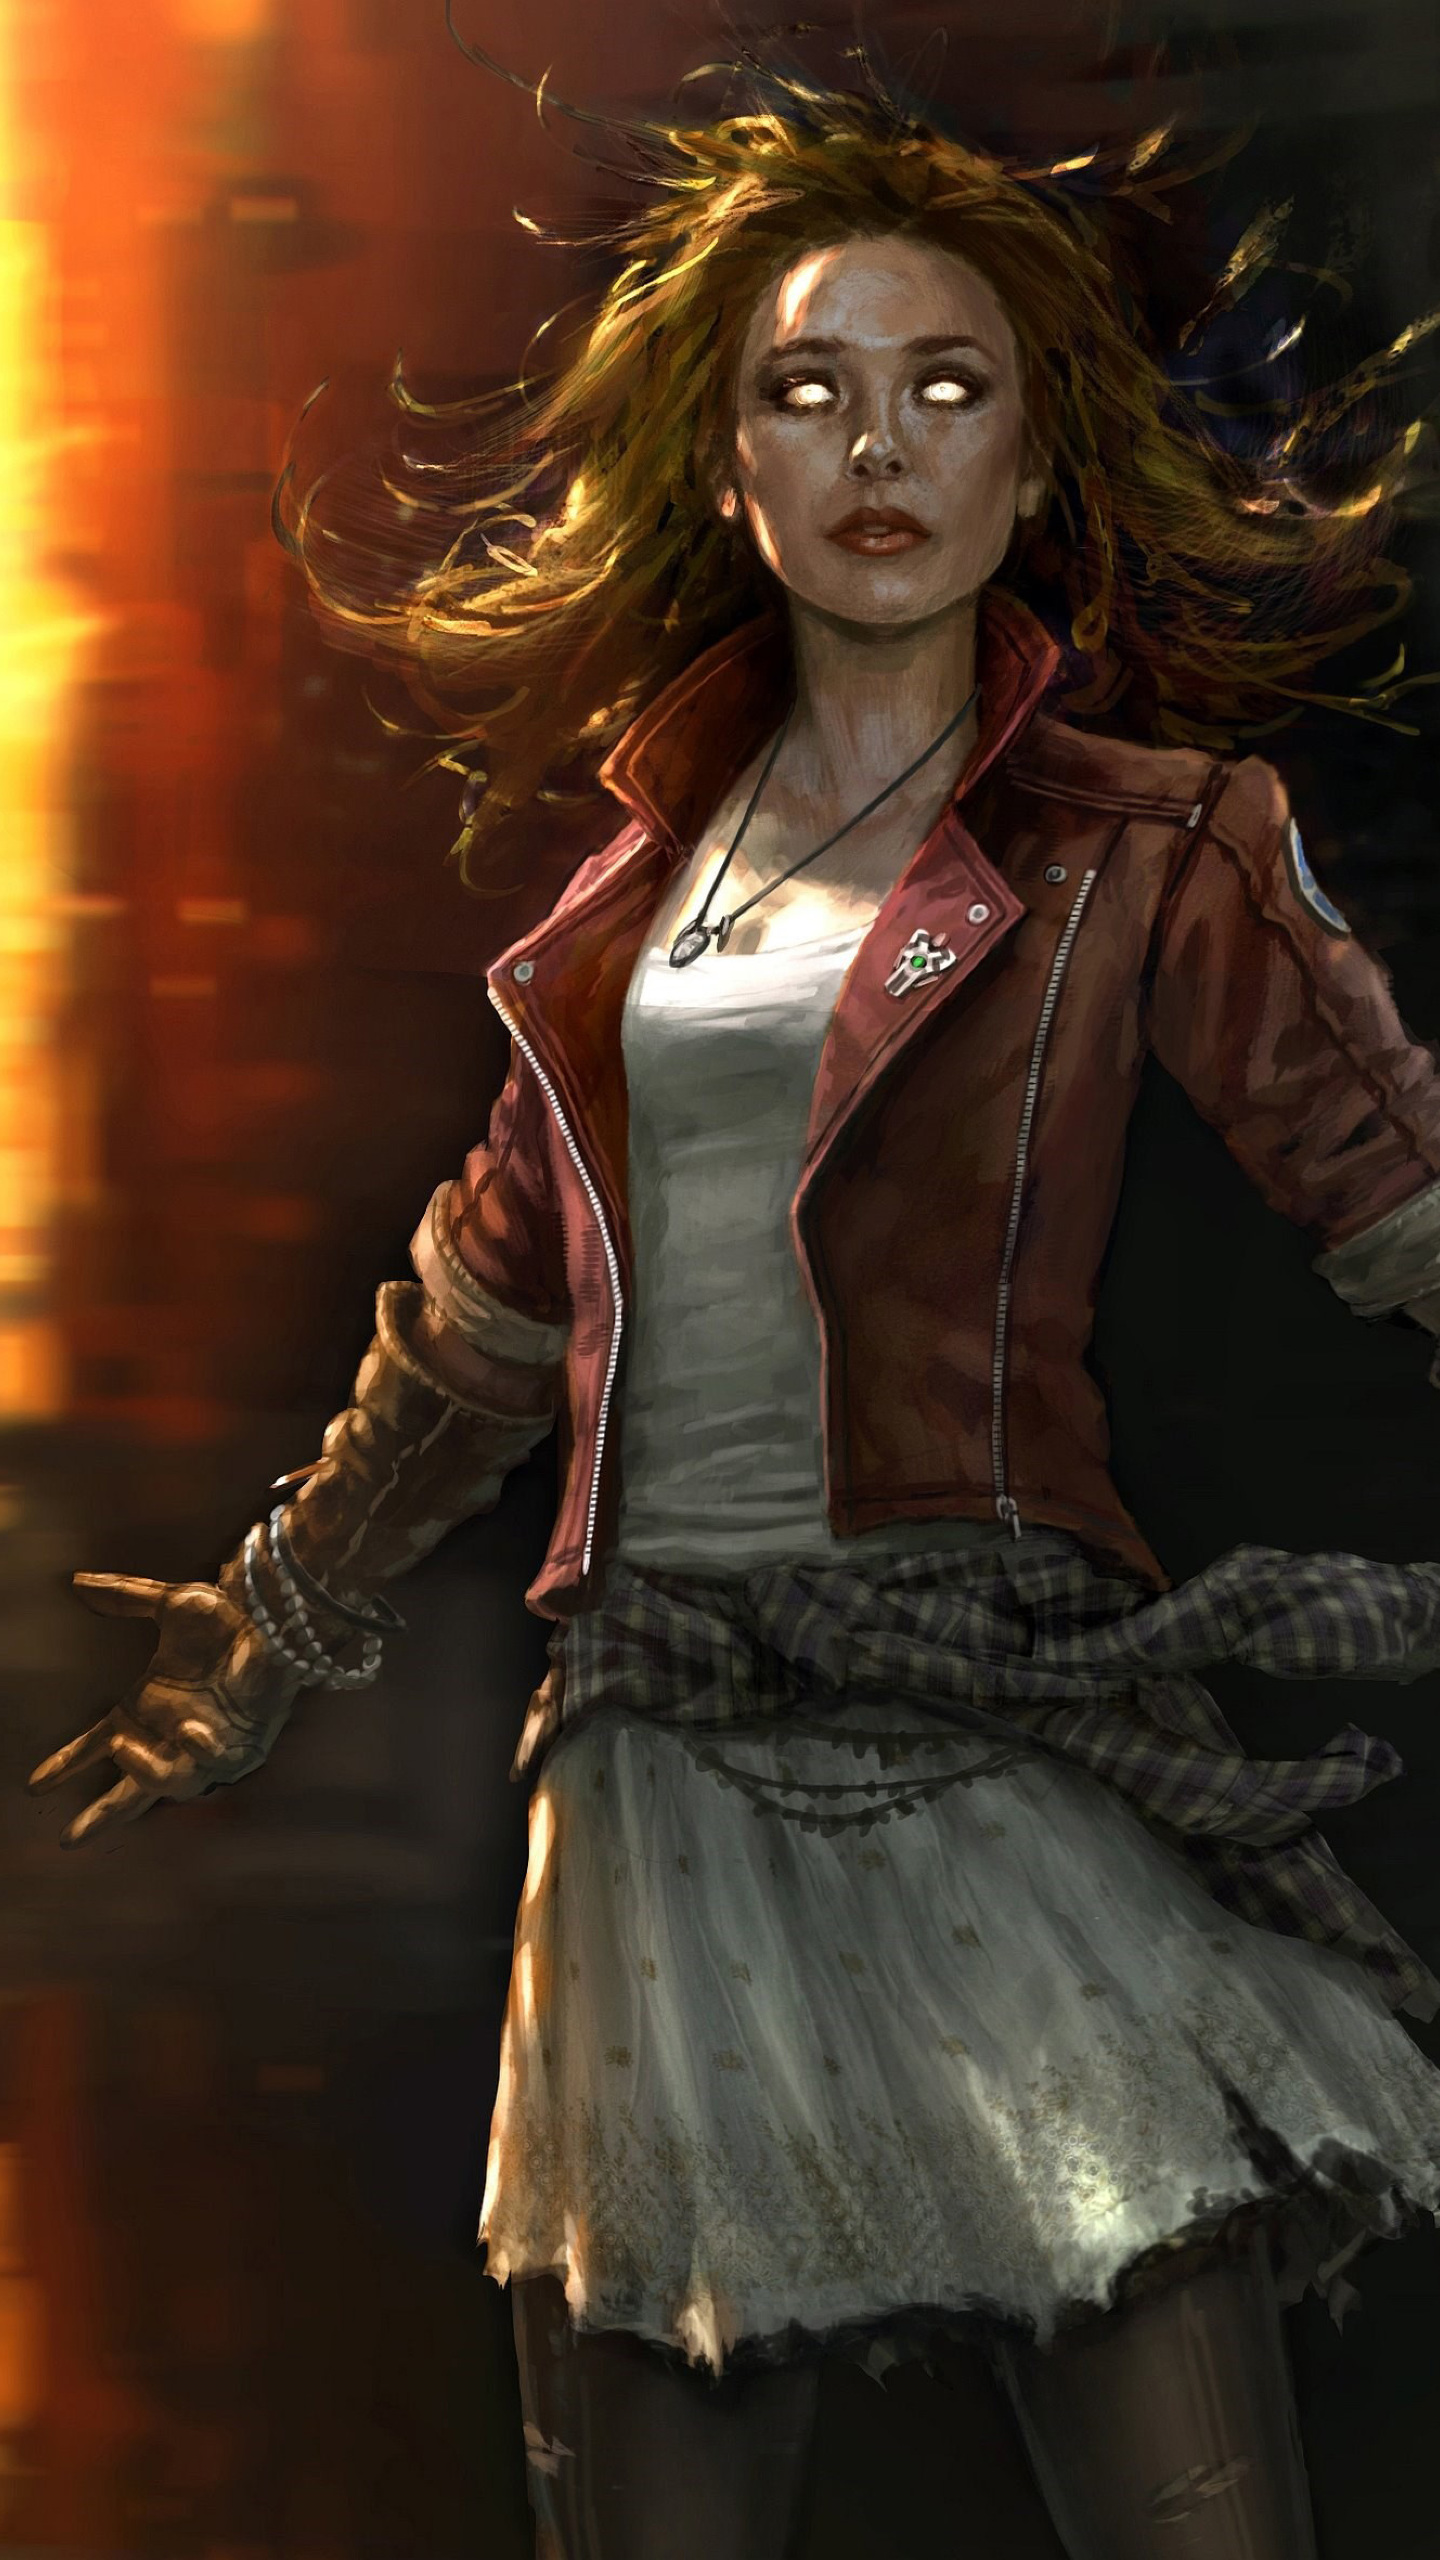 Marvel Scarlet Witch Concept Art - HD Wallpaper 